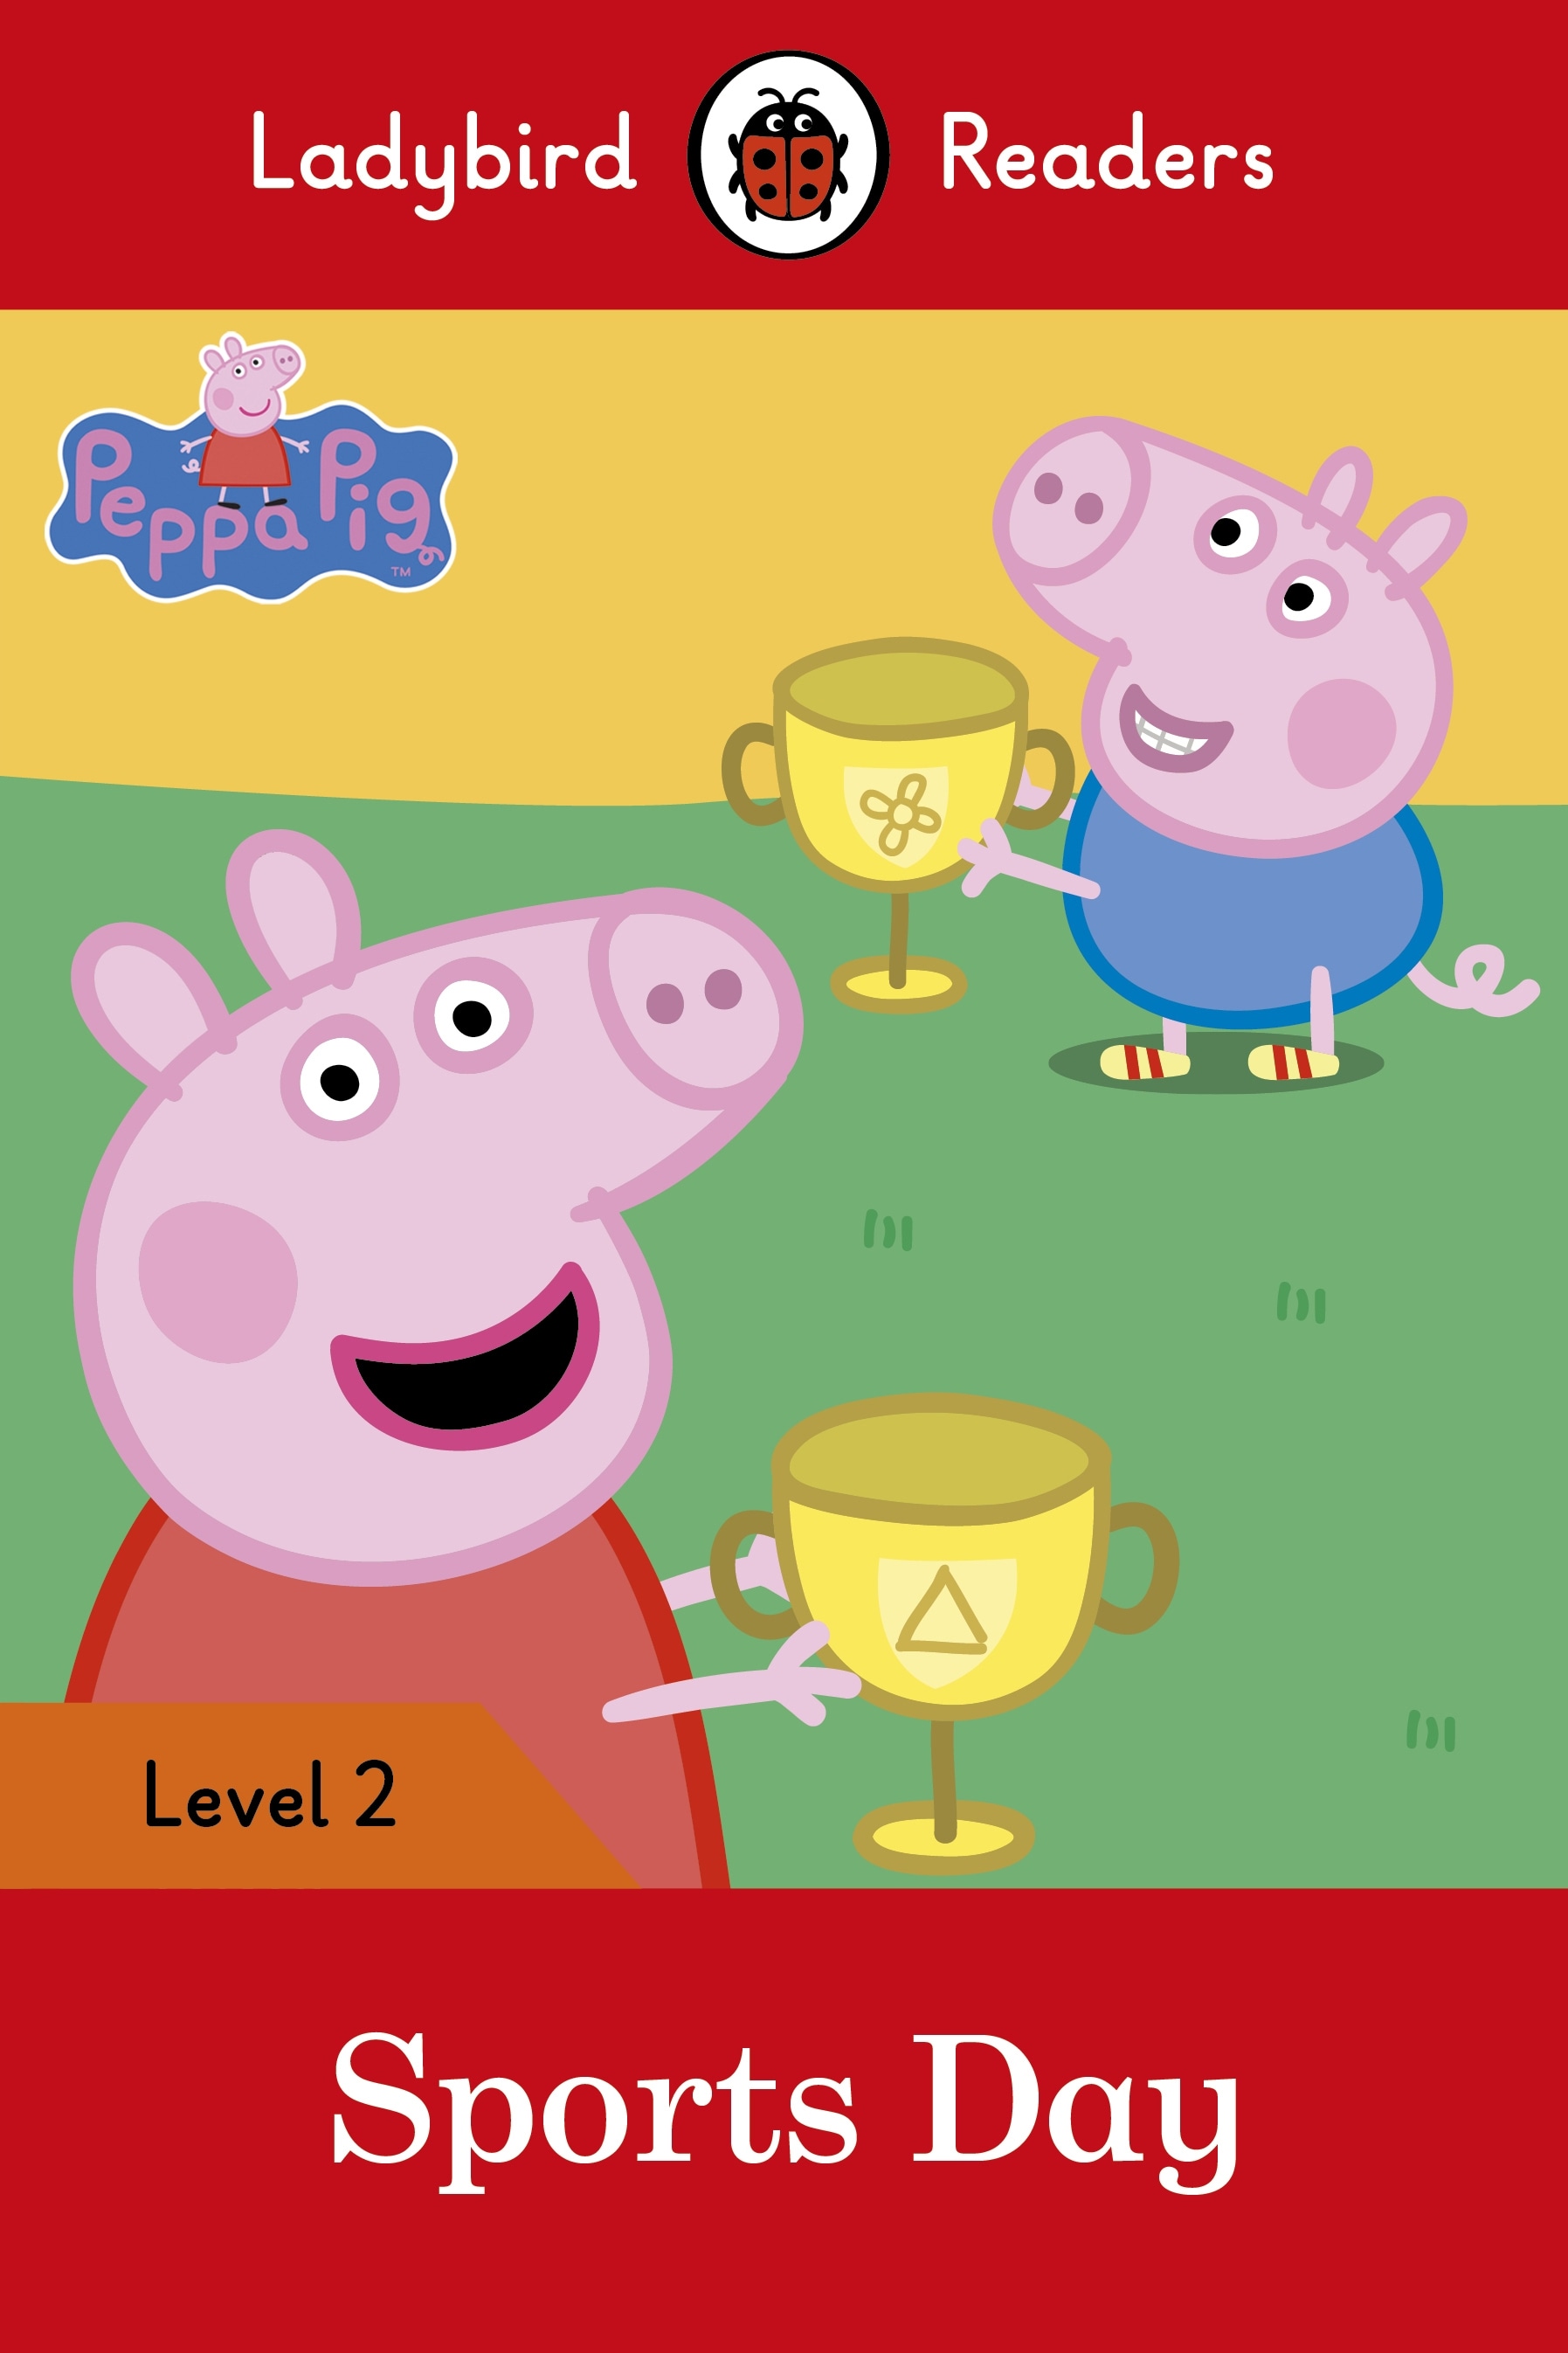 Book “Peppa Pig: Sports Day – Ladybird Readers Level 2” by Ladybird, Peppa Pig — July 7, 2016